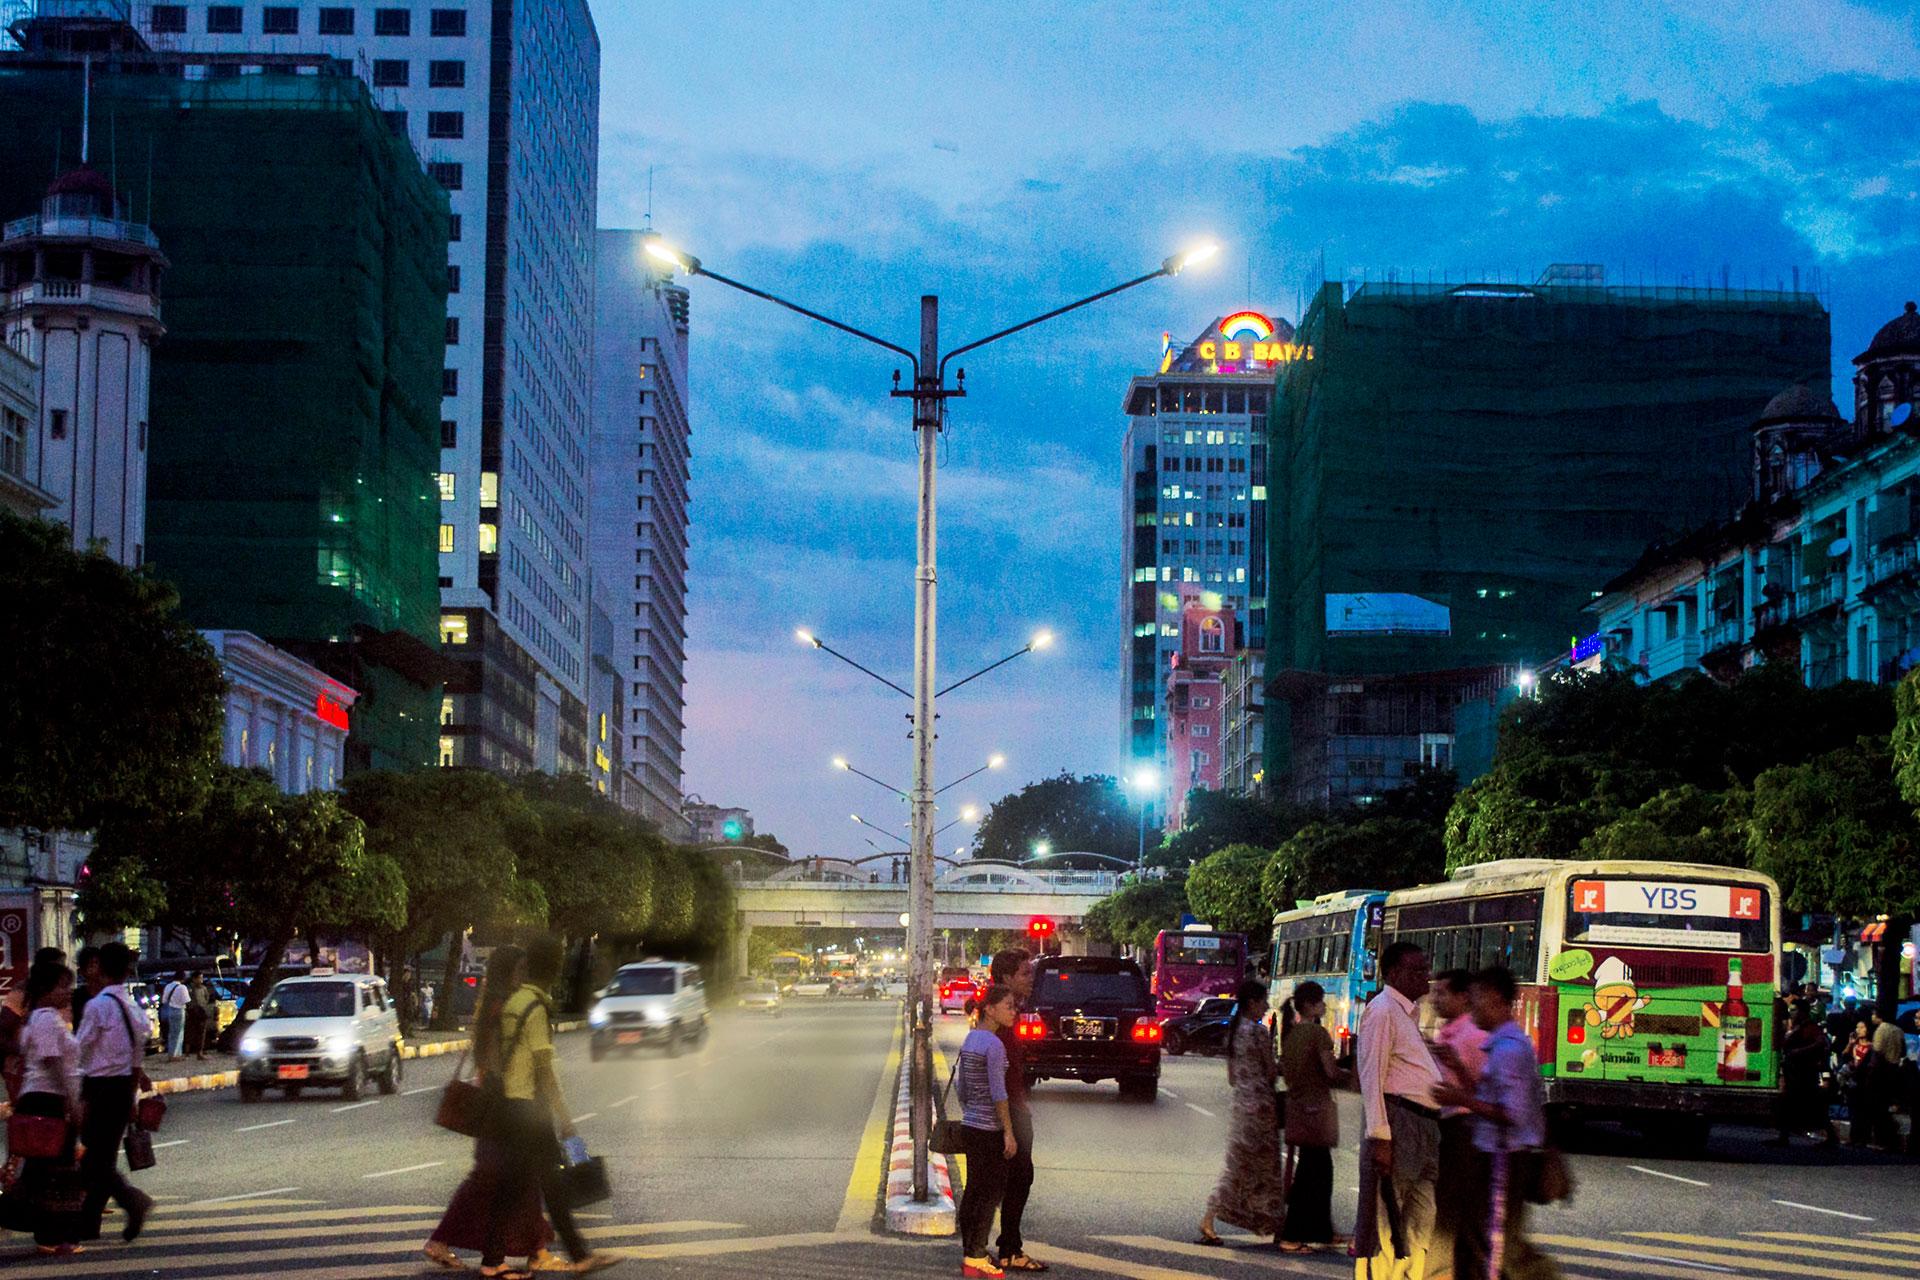 Avento lights up the main arteries of Myanmar's capital city to create safe streets